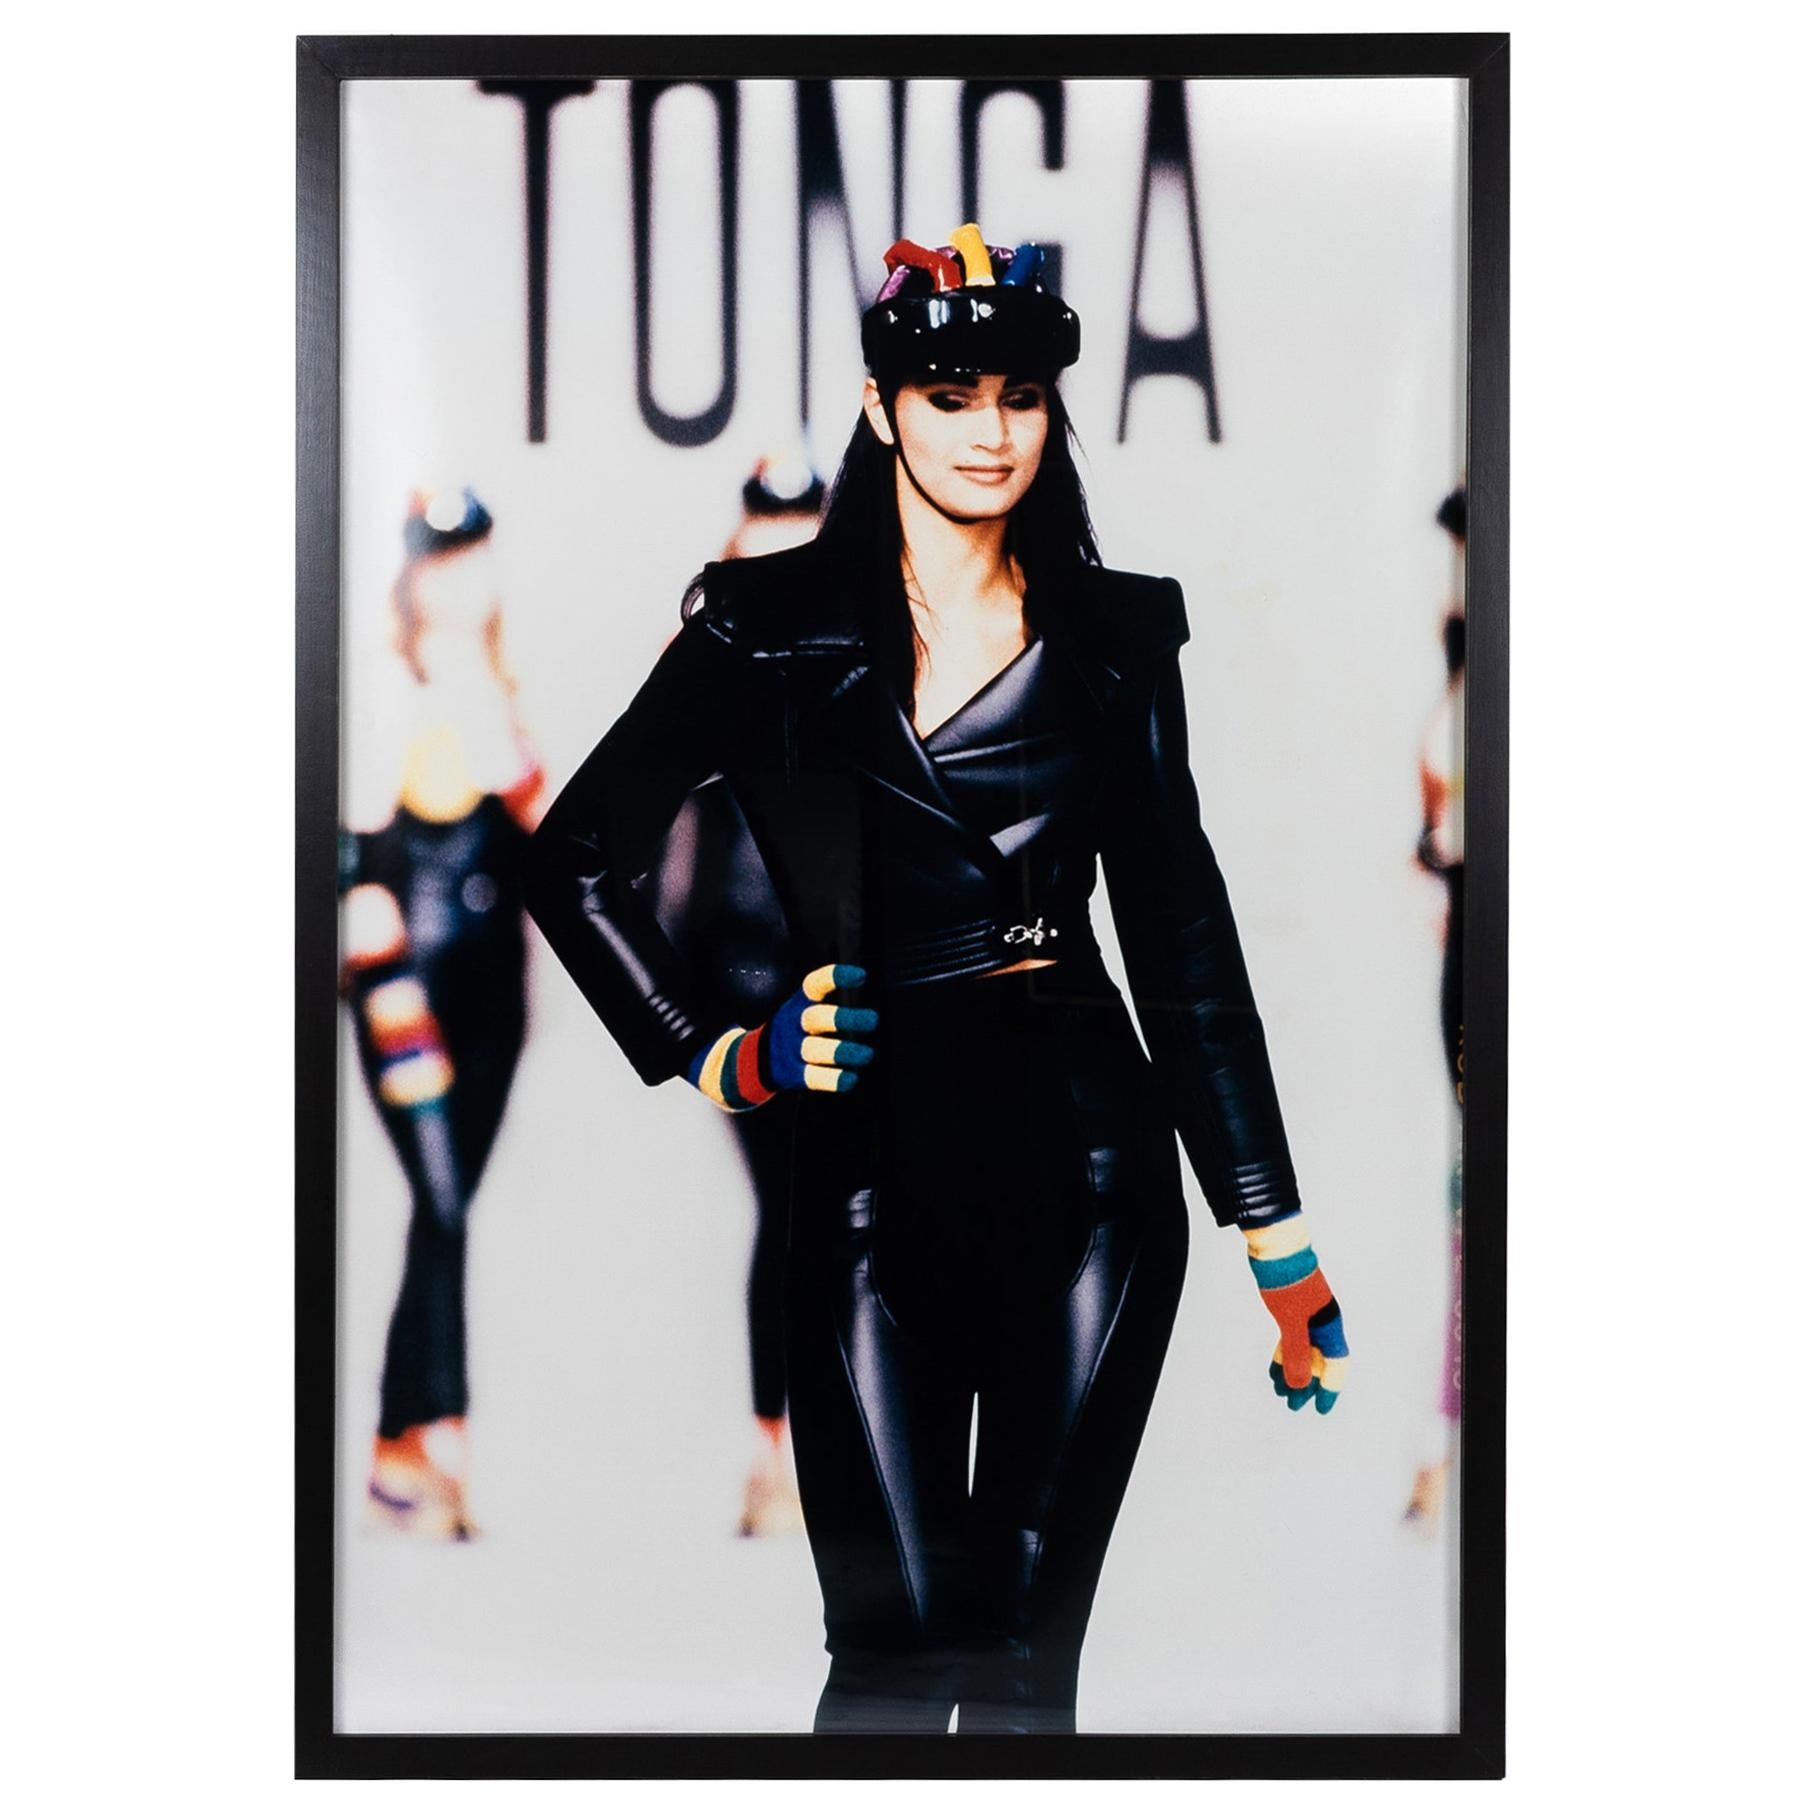 Large Fashion Photography of the Avant Garde Fashion Brand TONGA, Munich 1980s For Sale